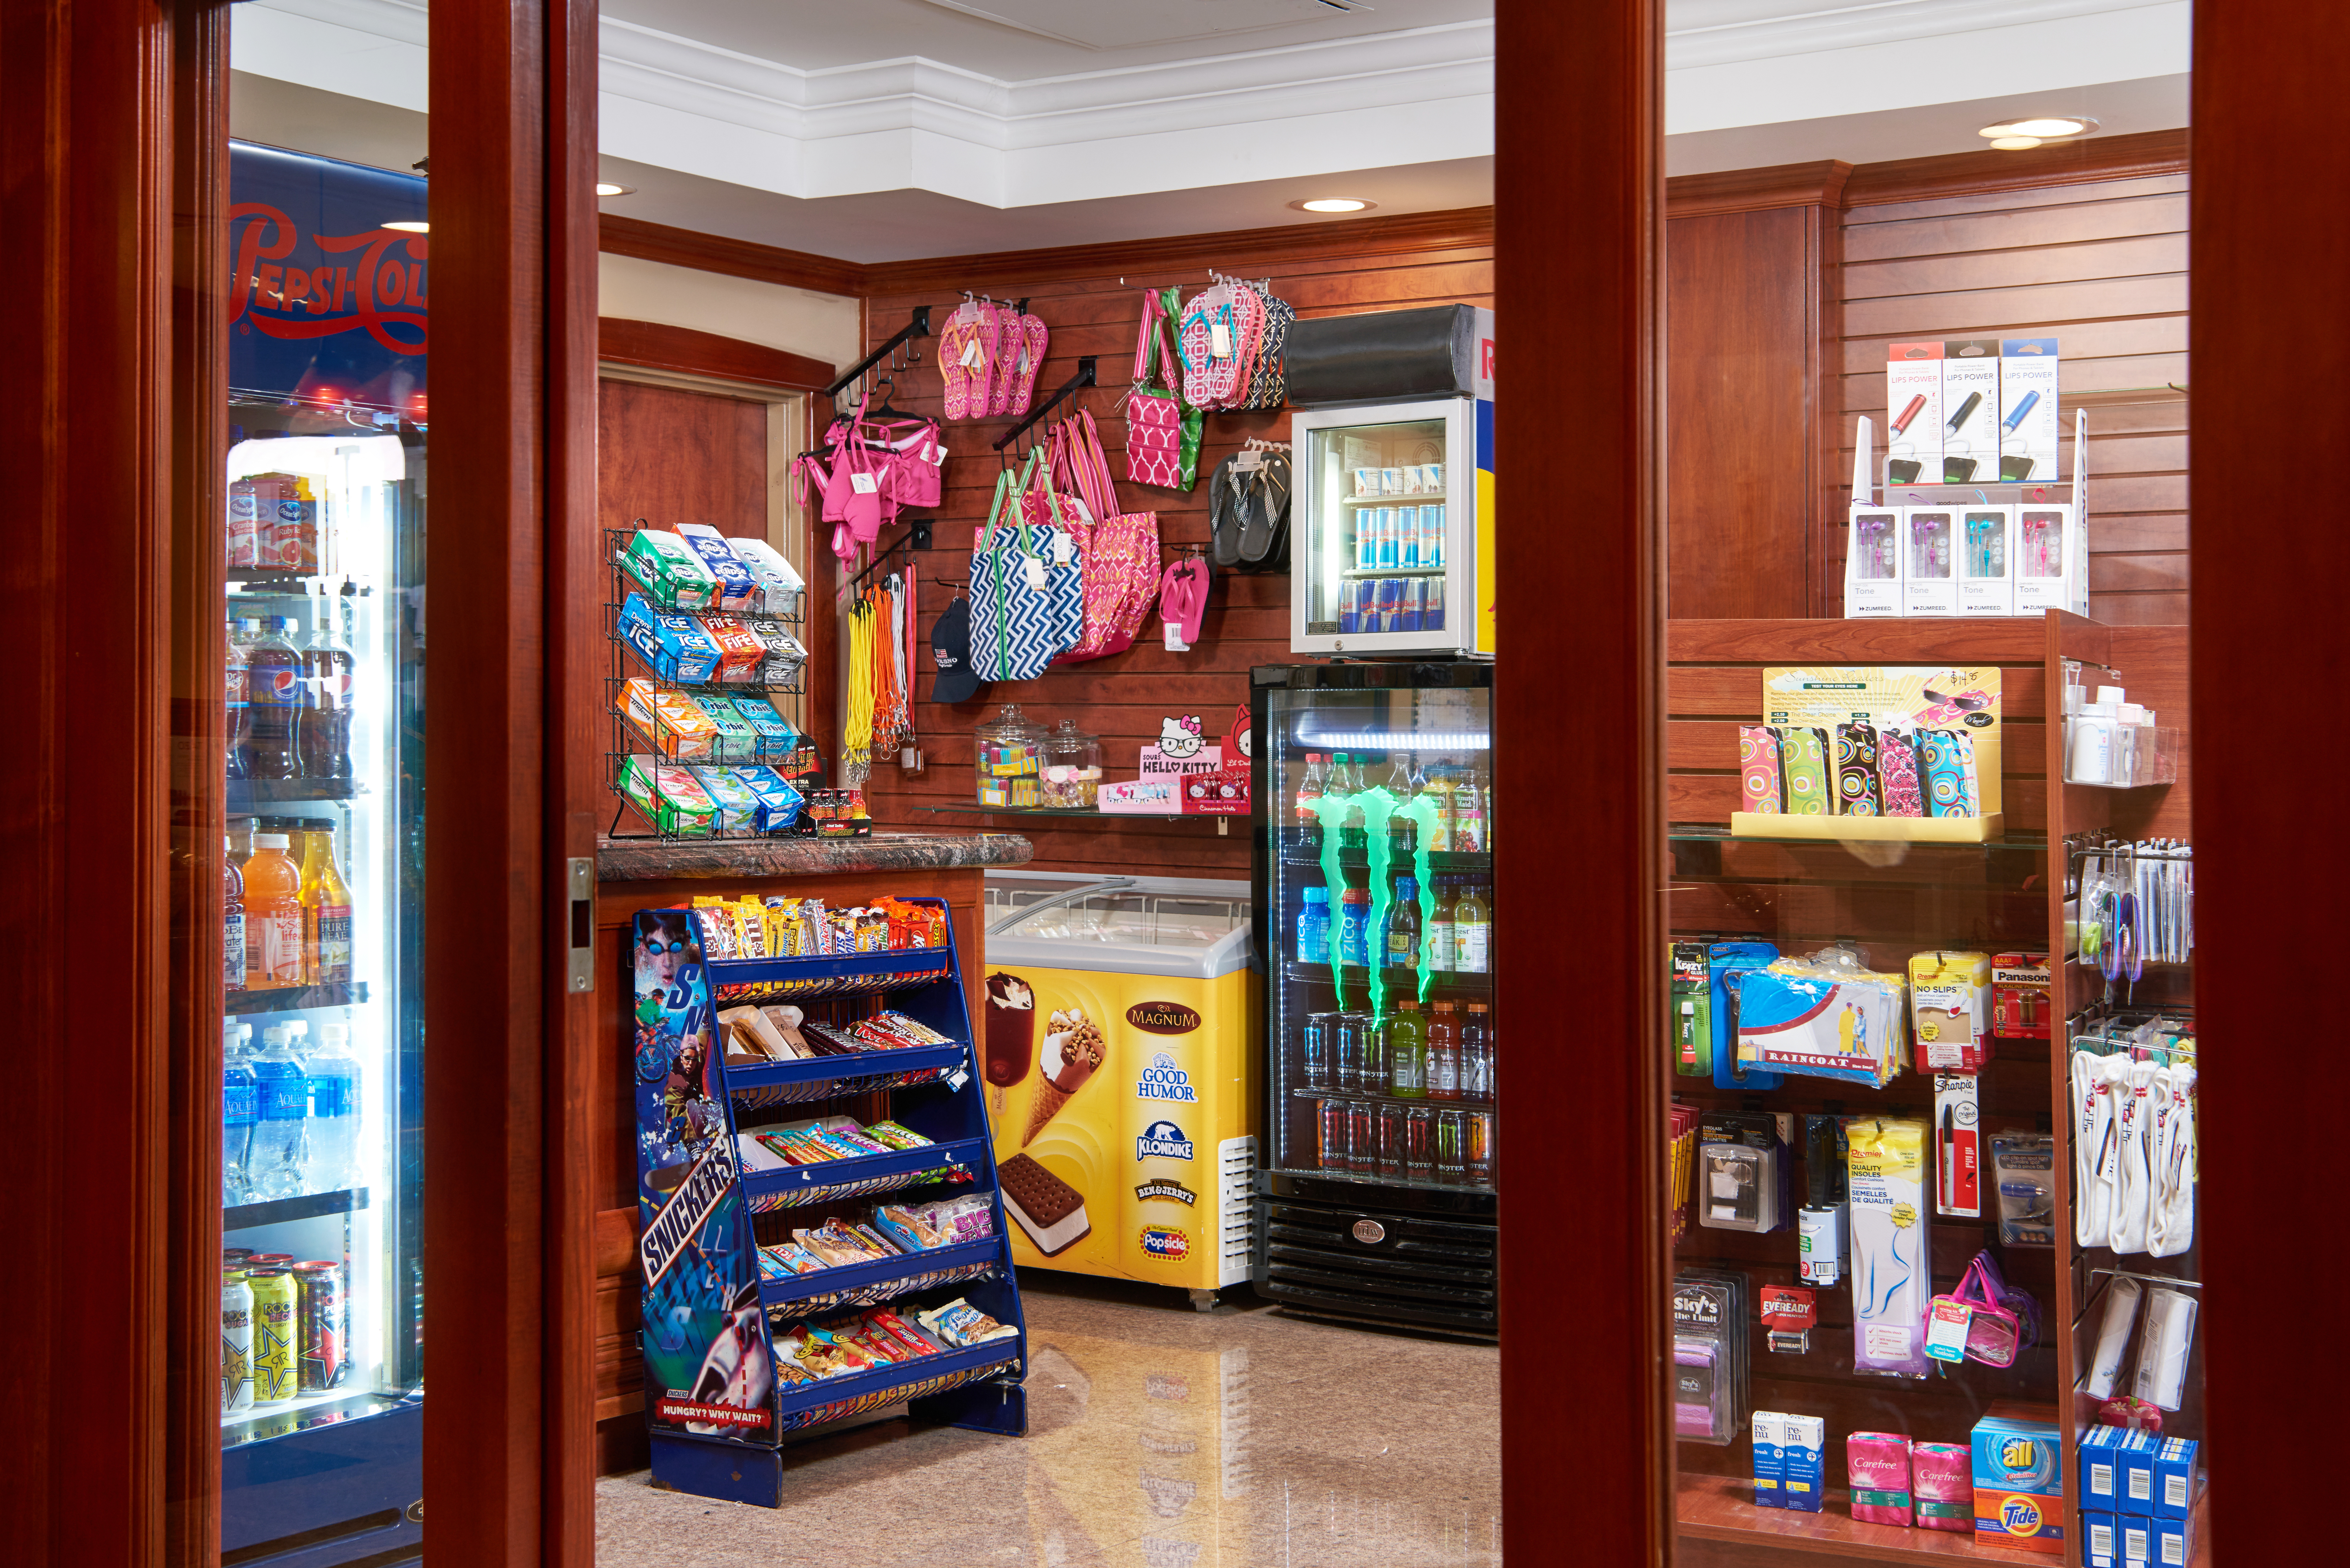 Souvenirs, Snacks and Convenience Items Available for Guest Purchase at Gift Shop  